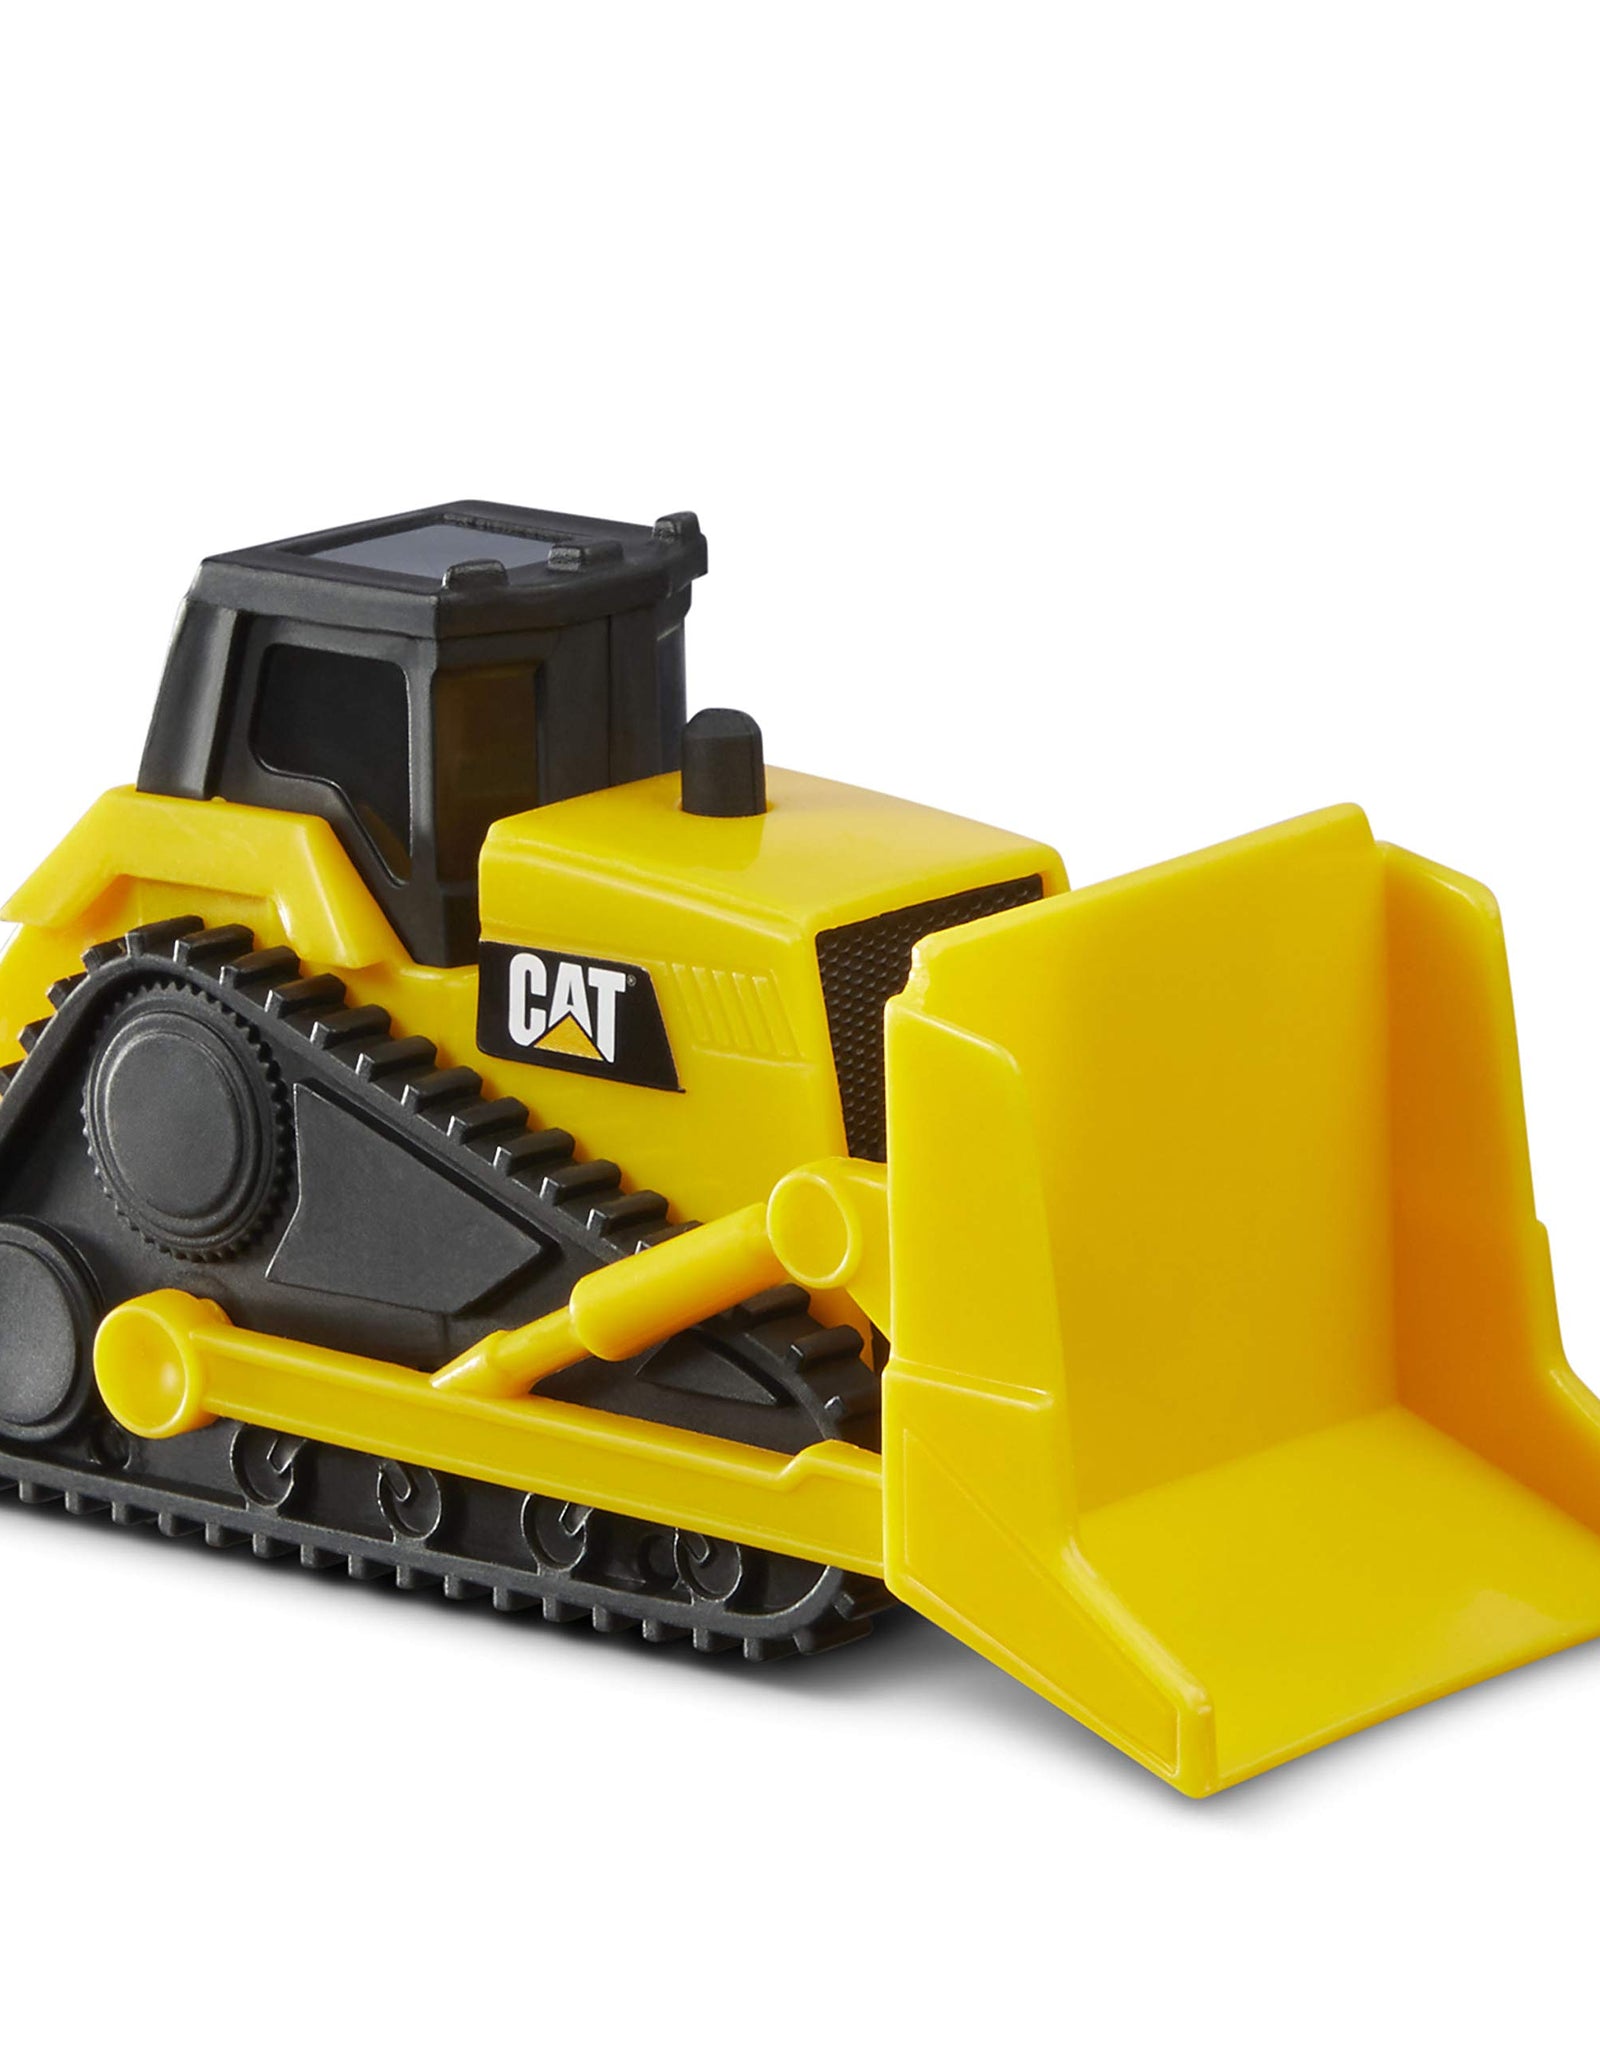 Cat Construction Little Machines 5 Pack - Great Cake Toppers - Great for Easter Baskets, Yellow